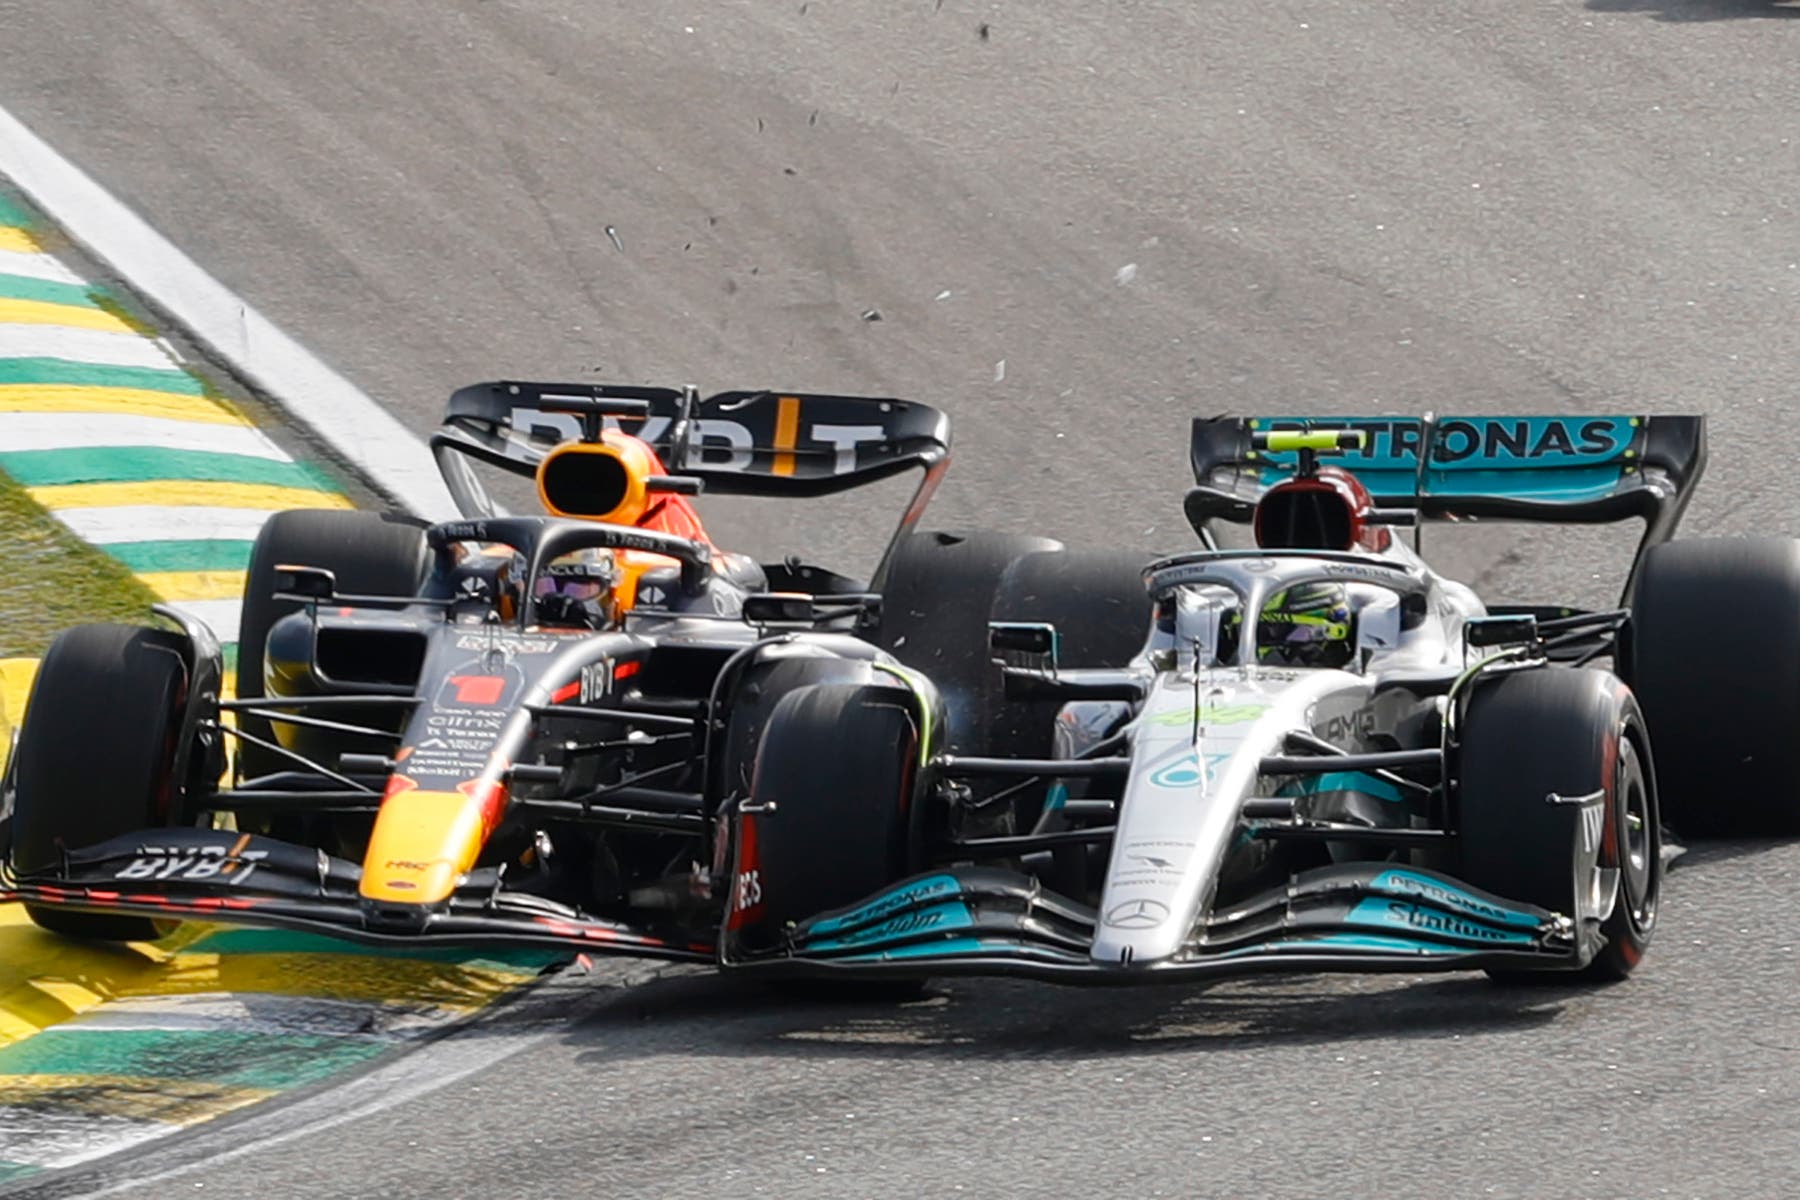 Max Verstappen collided with Lewis Hamilton during the Brazilian Grand Prix